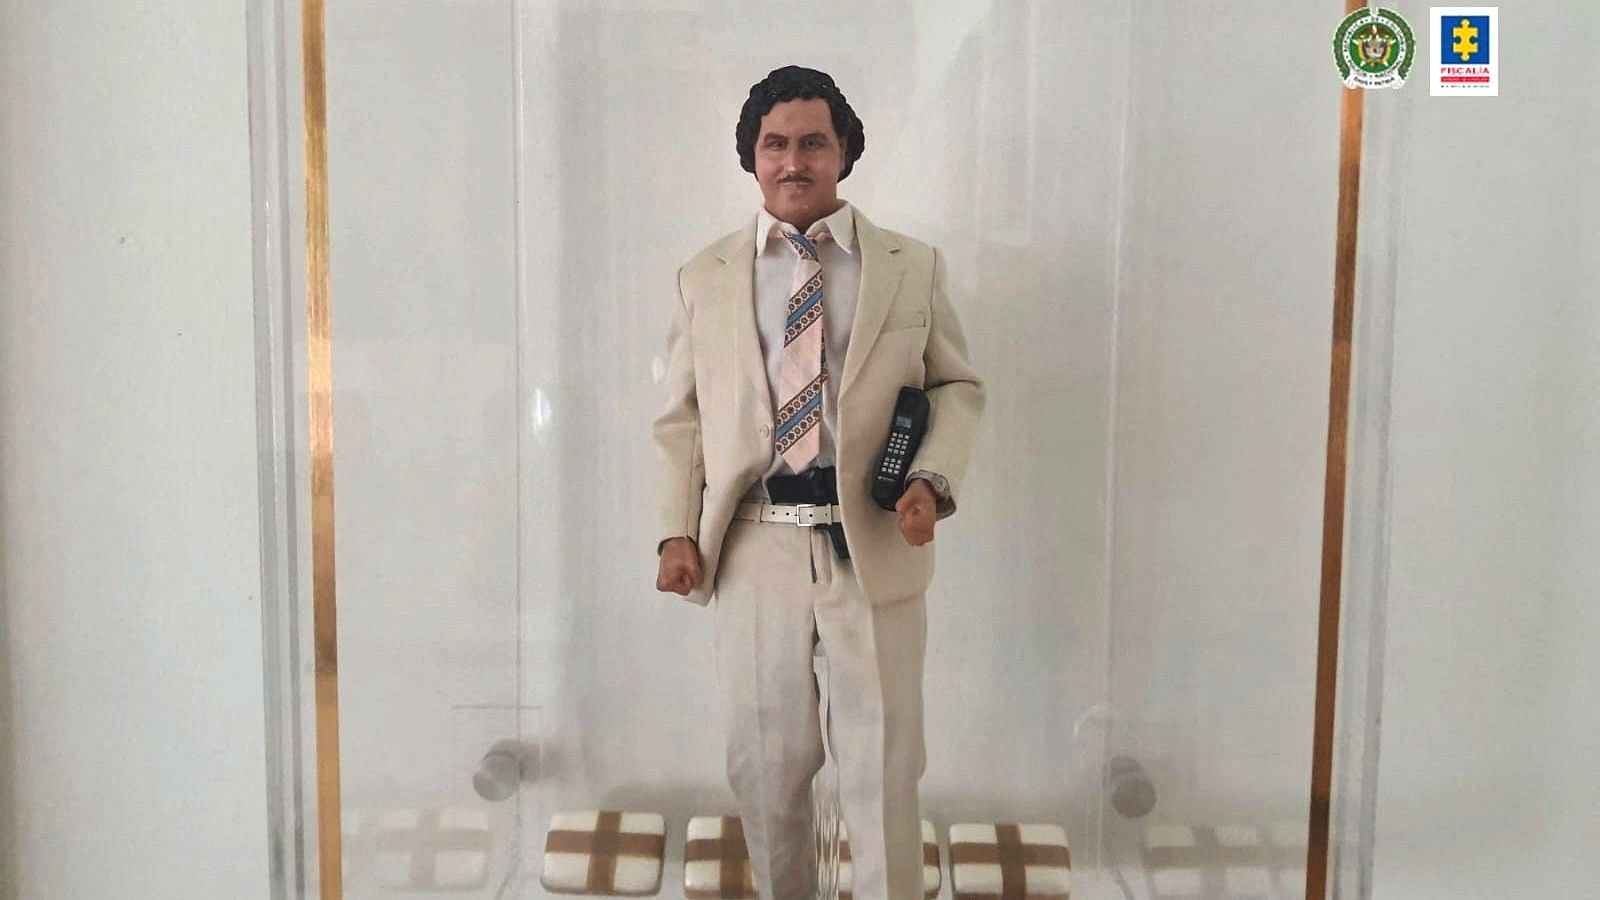 <div class="paragraphs"><p>A mannequin of late drug kingpin Pablo Escobar is seen at a property seized by the Colombian Prosecutor's office, in Medellin, Colombia.</p></div>